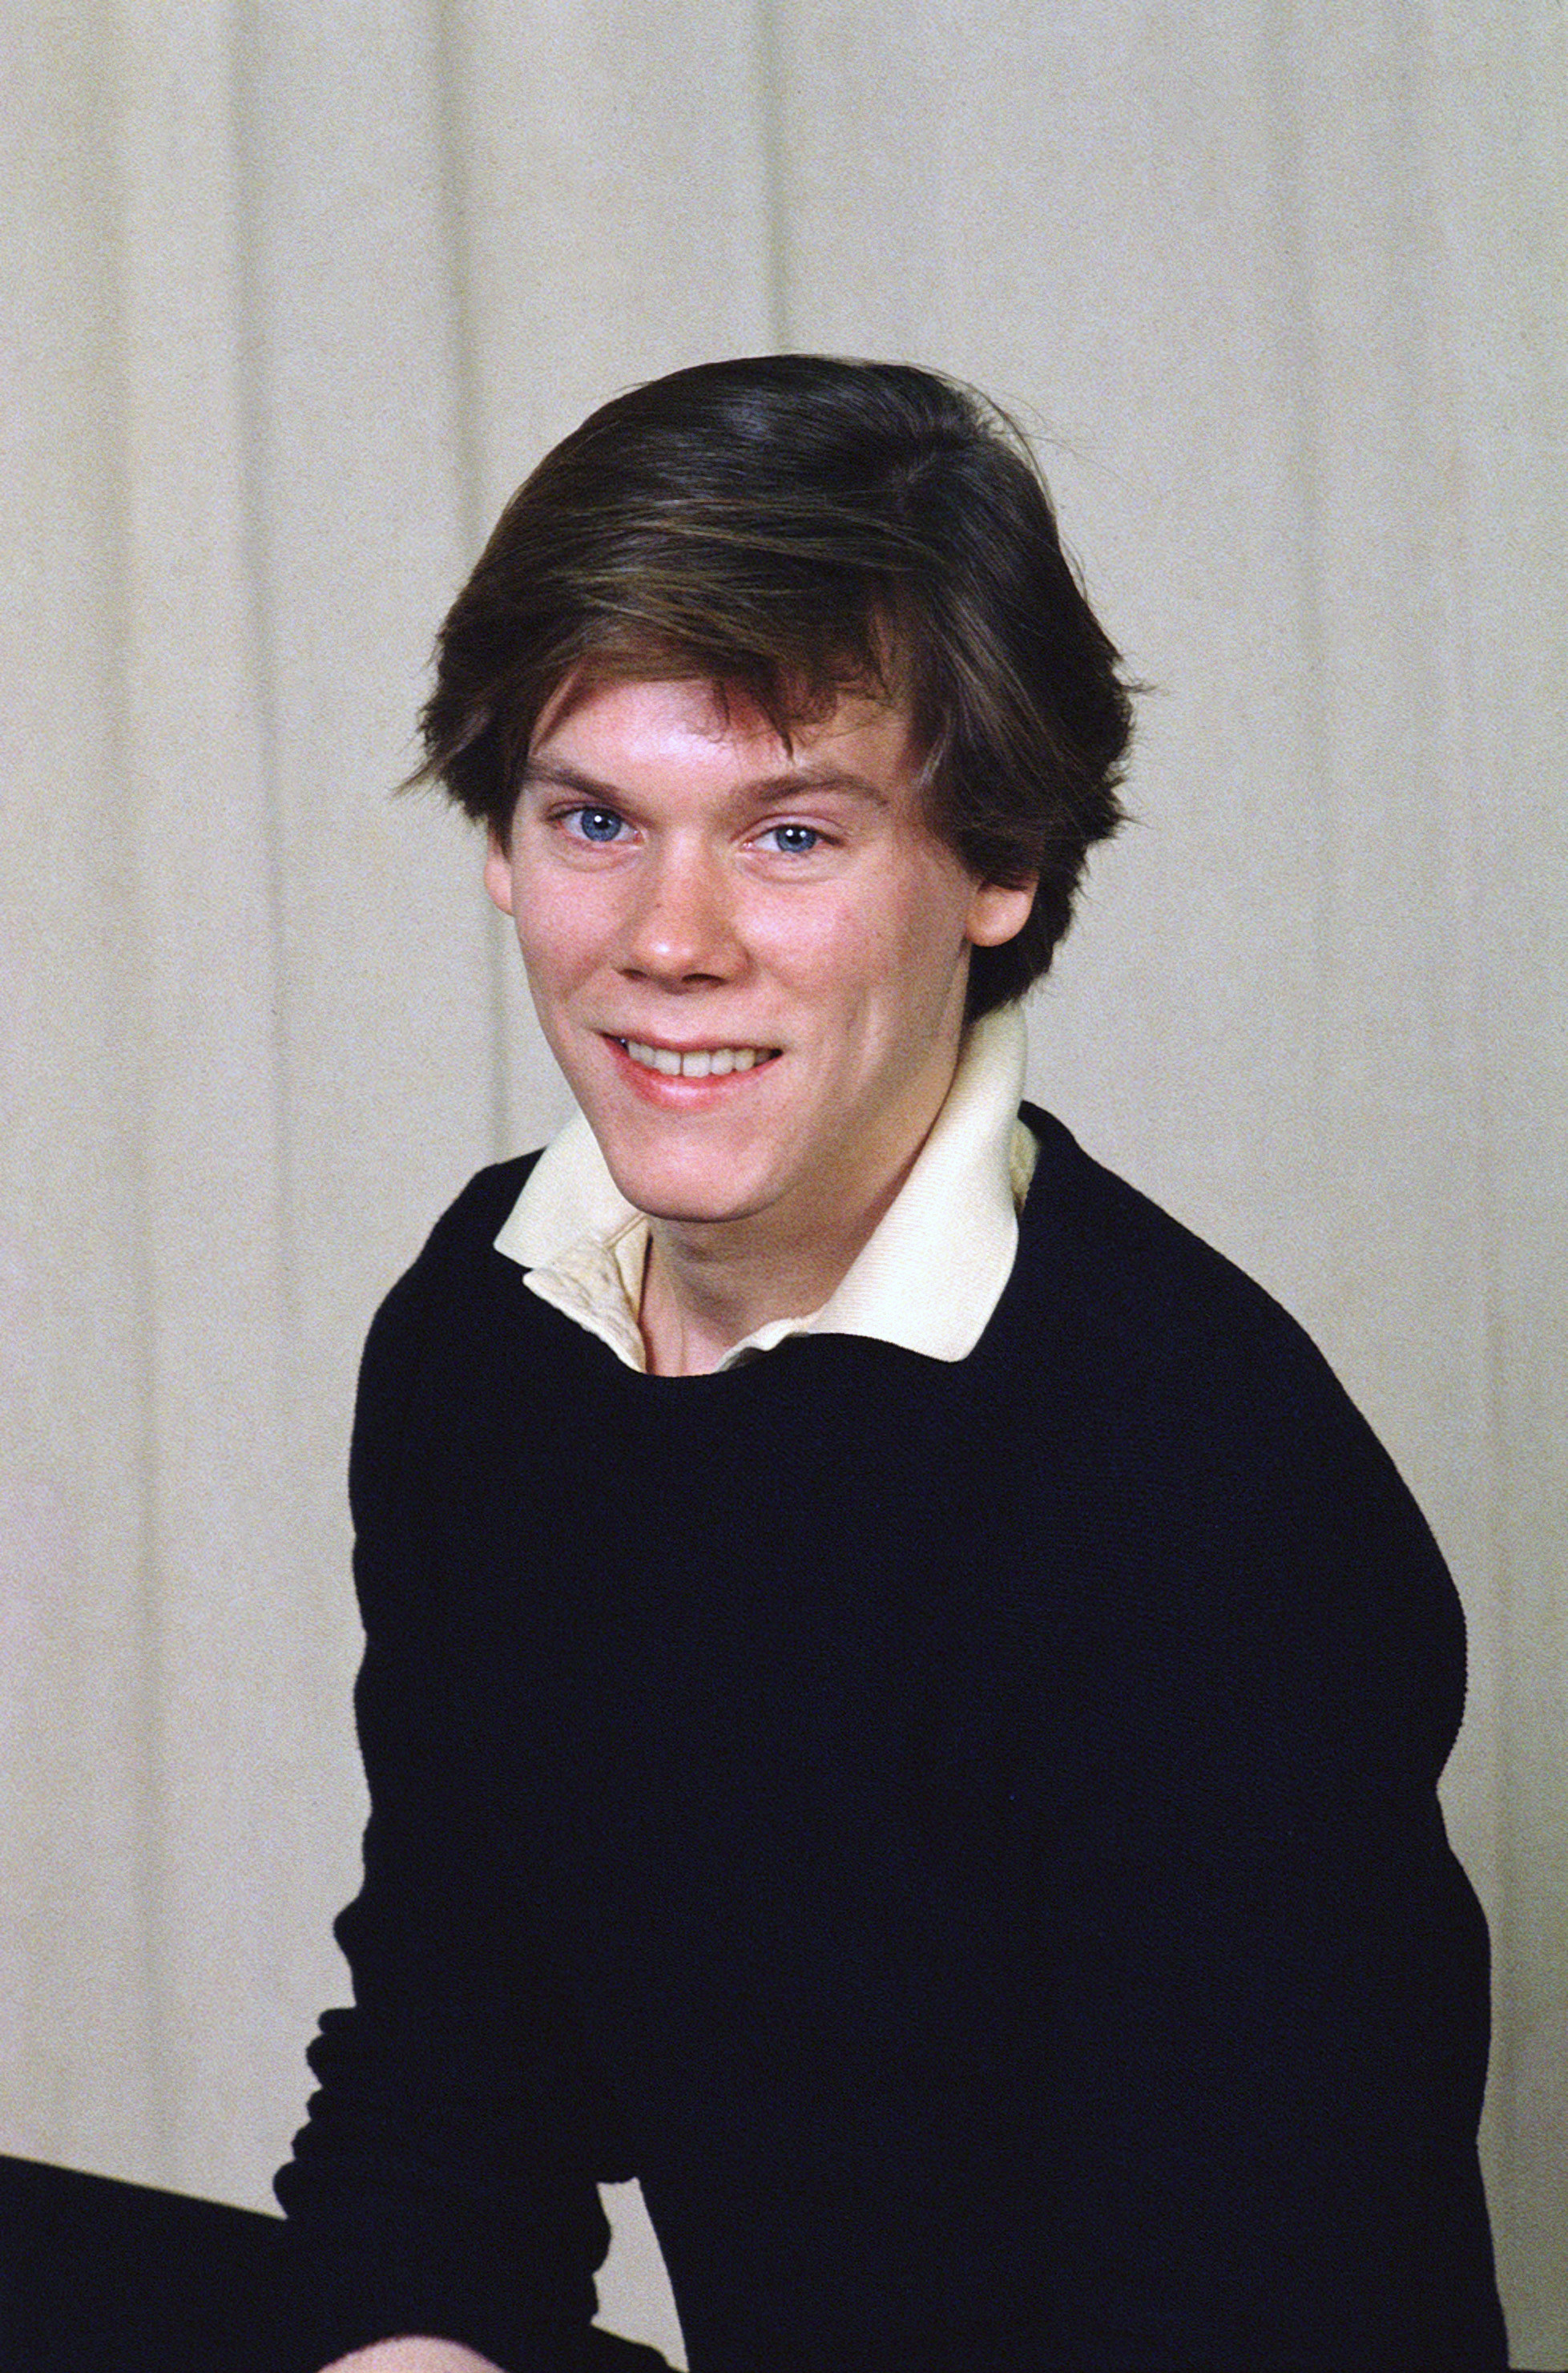 The famous actor posing for a photo, circa 1980 | Source: Getty Images